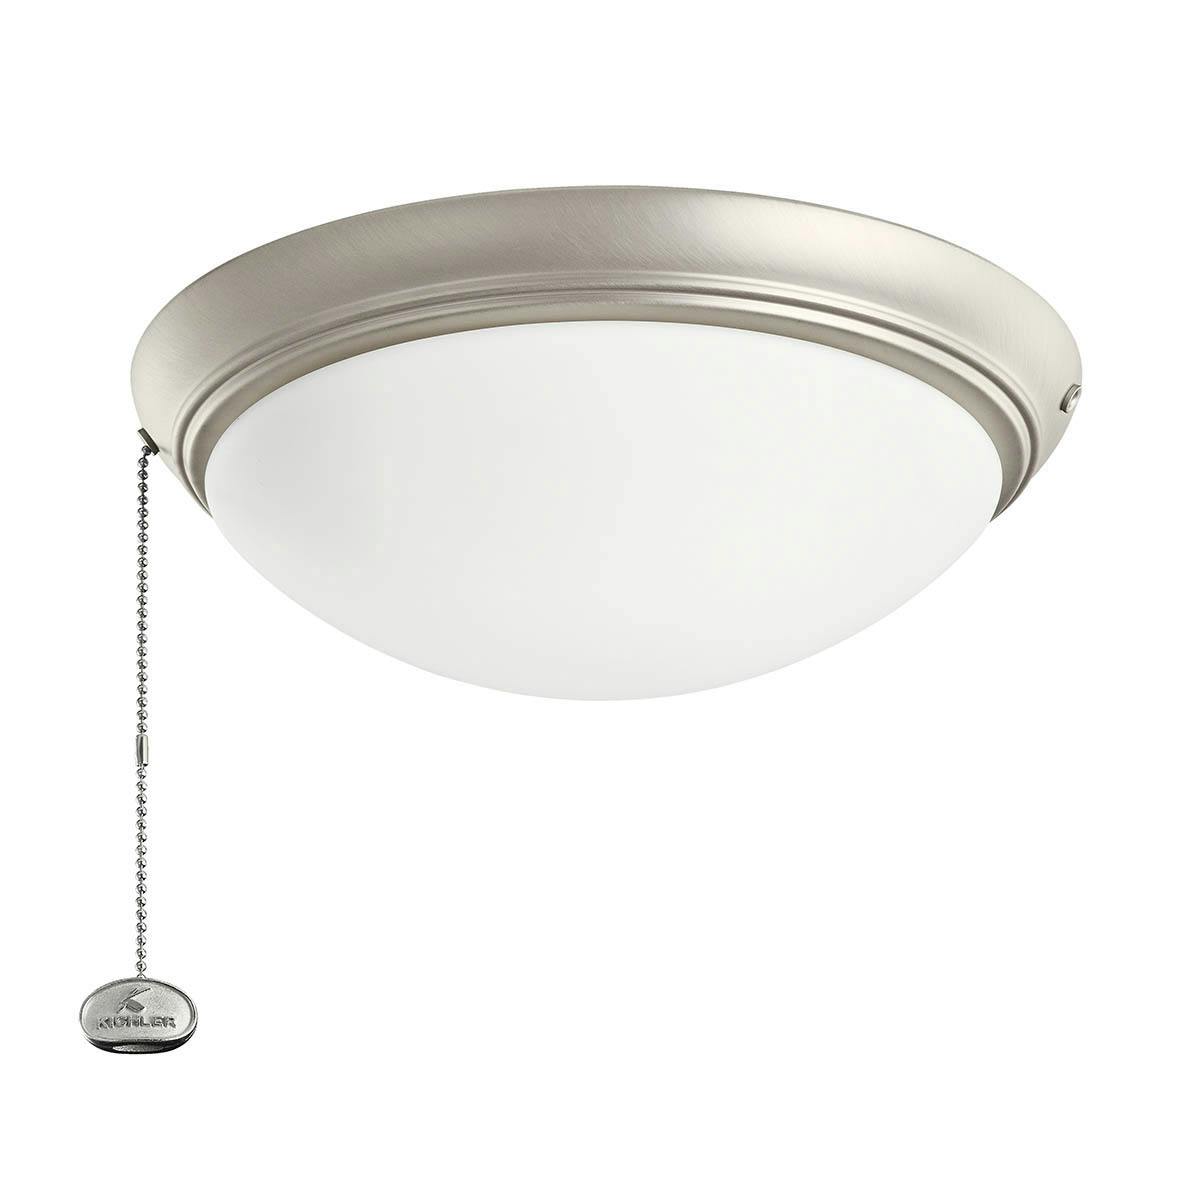 LED Low-Profile 11.5" Light Kit Nickel on a white background